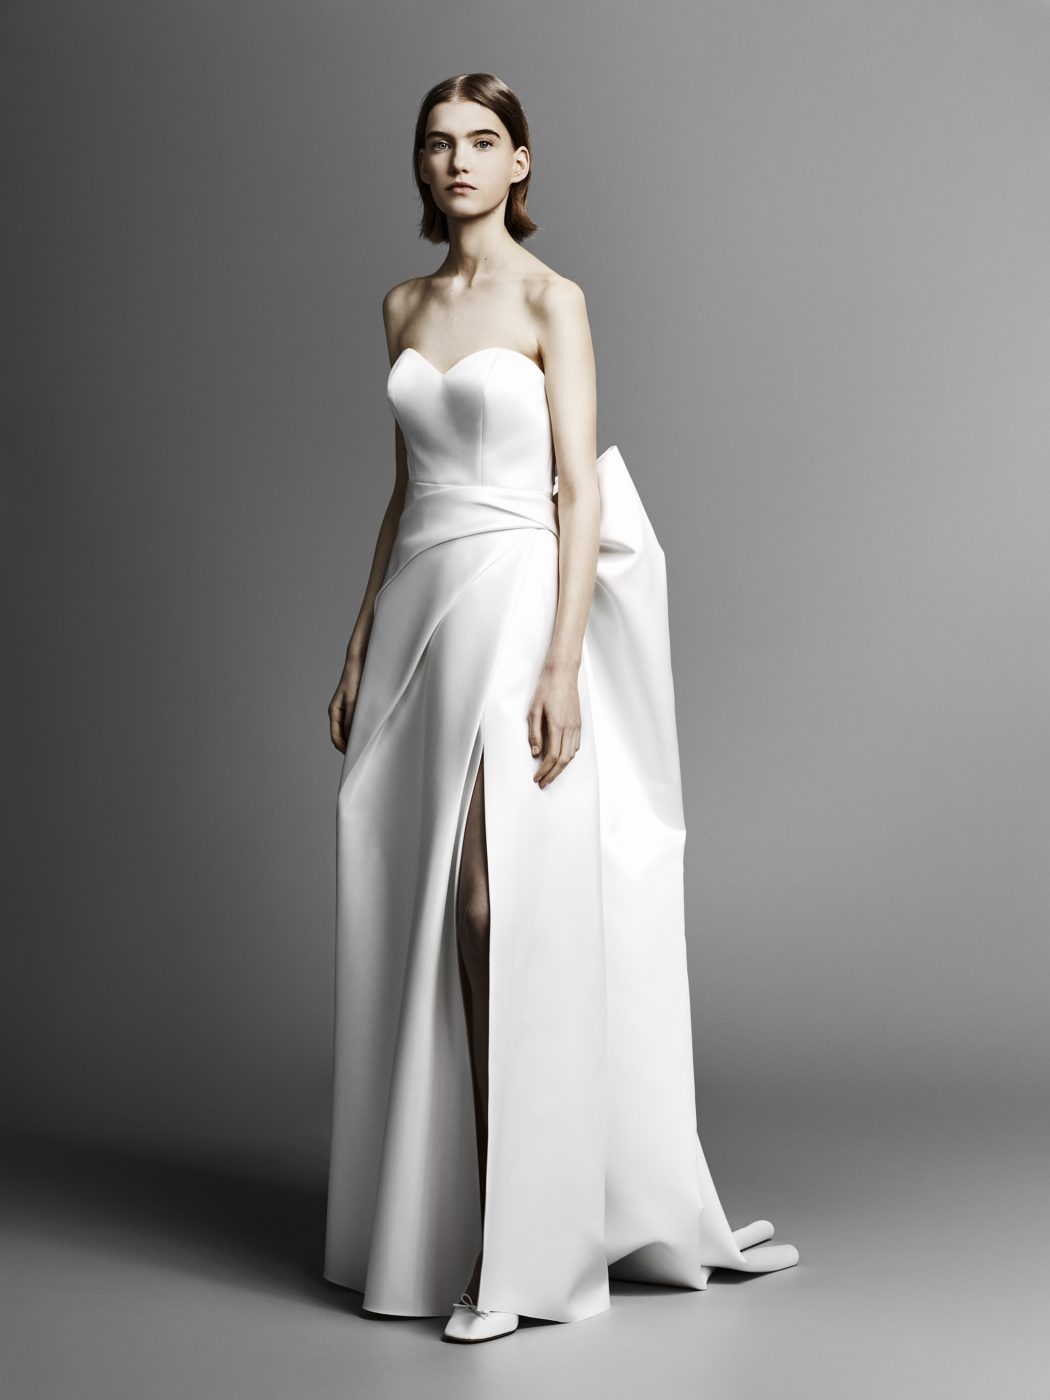 viktor-rolf-collection-robe-mariee-printemps-2019-millemariages-7